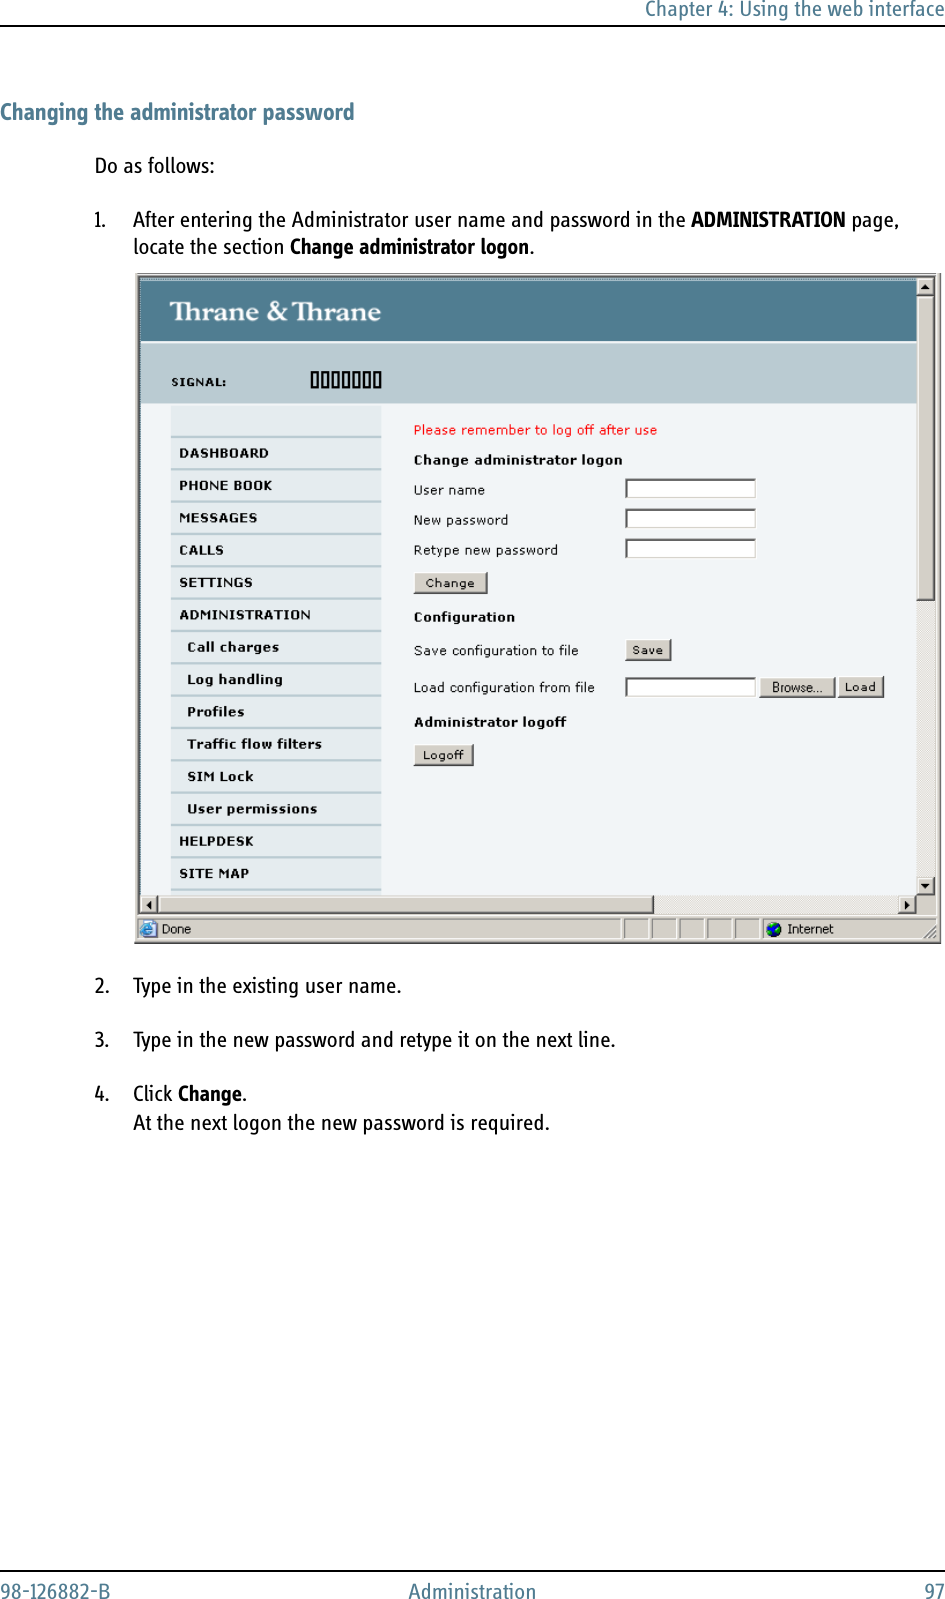 Chapter 4: Using the web interface98-126882-B Administration 97Changing the administrator passwordDo as follows:1. After entering the Administrator user name and password in the ADMINISTRATION page, locate the section Change administrator logon.2. Type in the existing user name.3. Type in the new password and retype it on the next line.4. Click Change.At the next logon the new password is required.